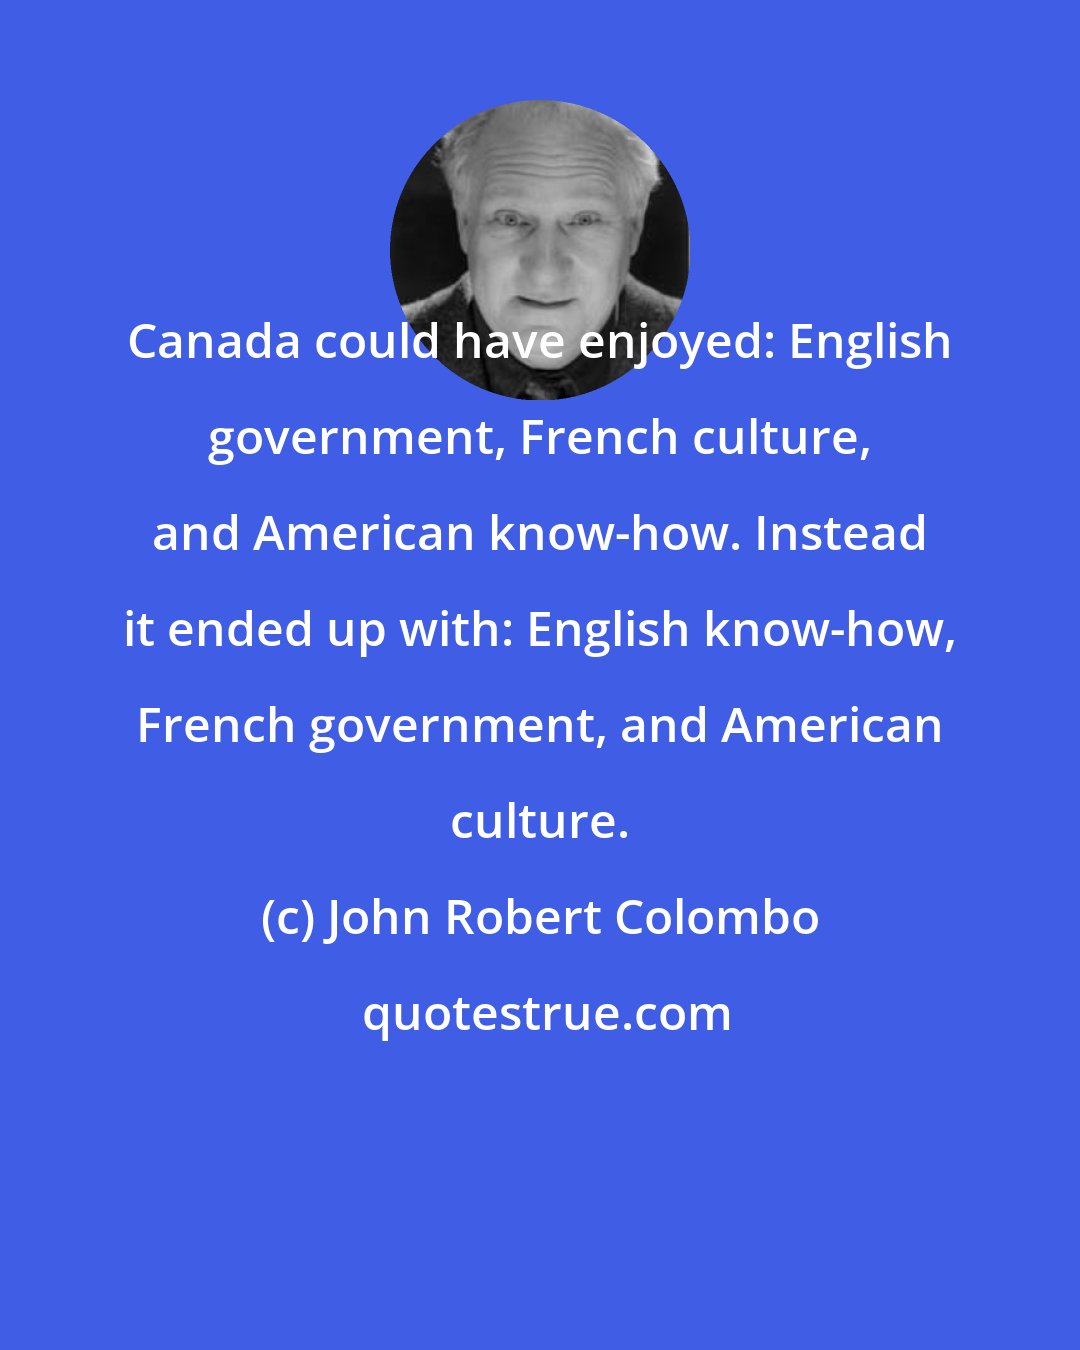 John Robert Colombo: Canada could have enjoyed: English government, French culture, and American know-how. Instead it ended up with: English know-how, French government, and American culture.